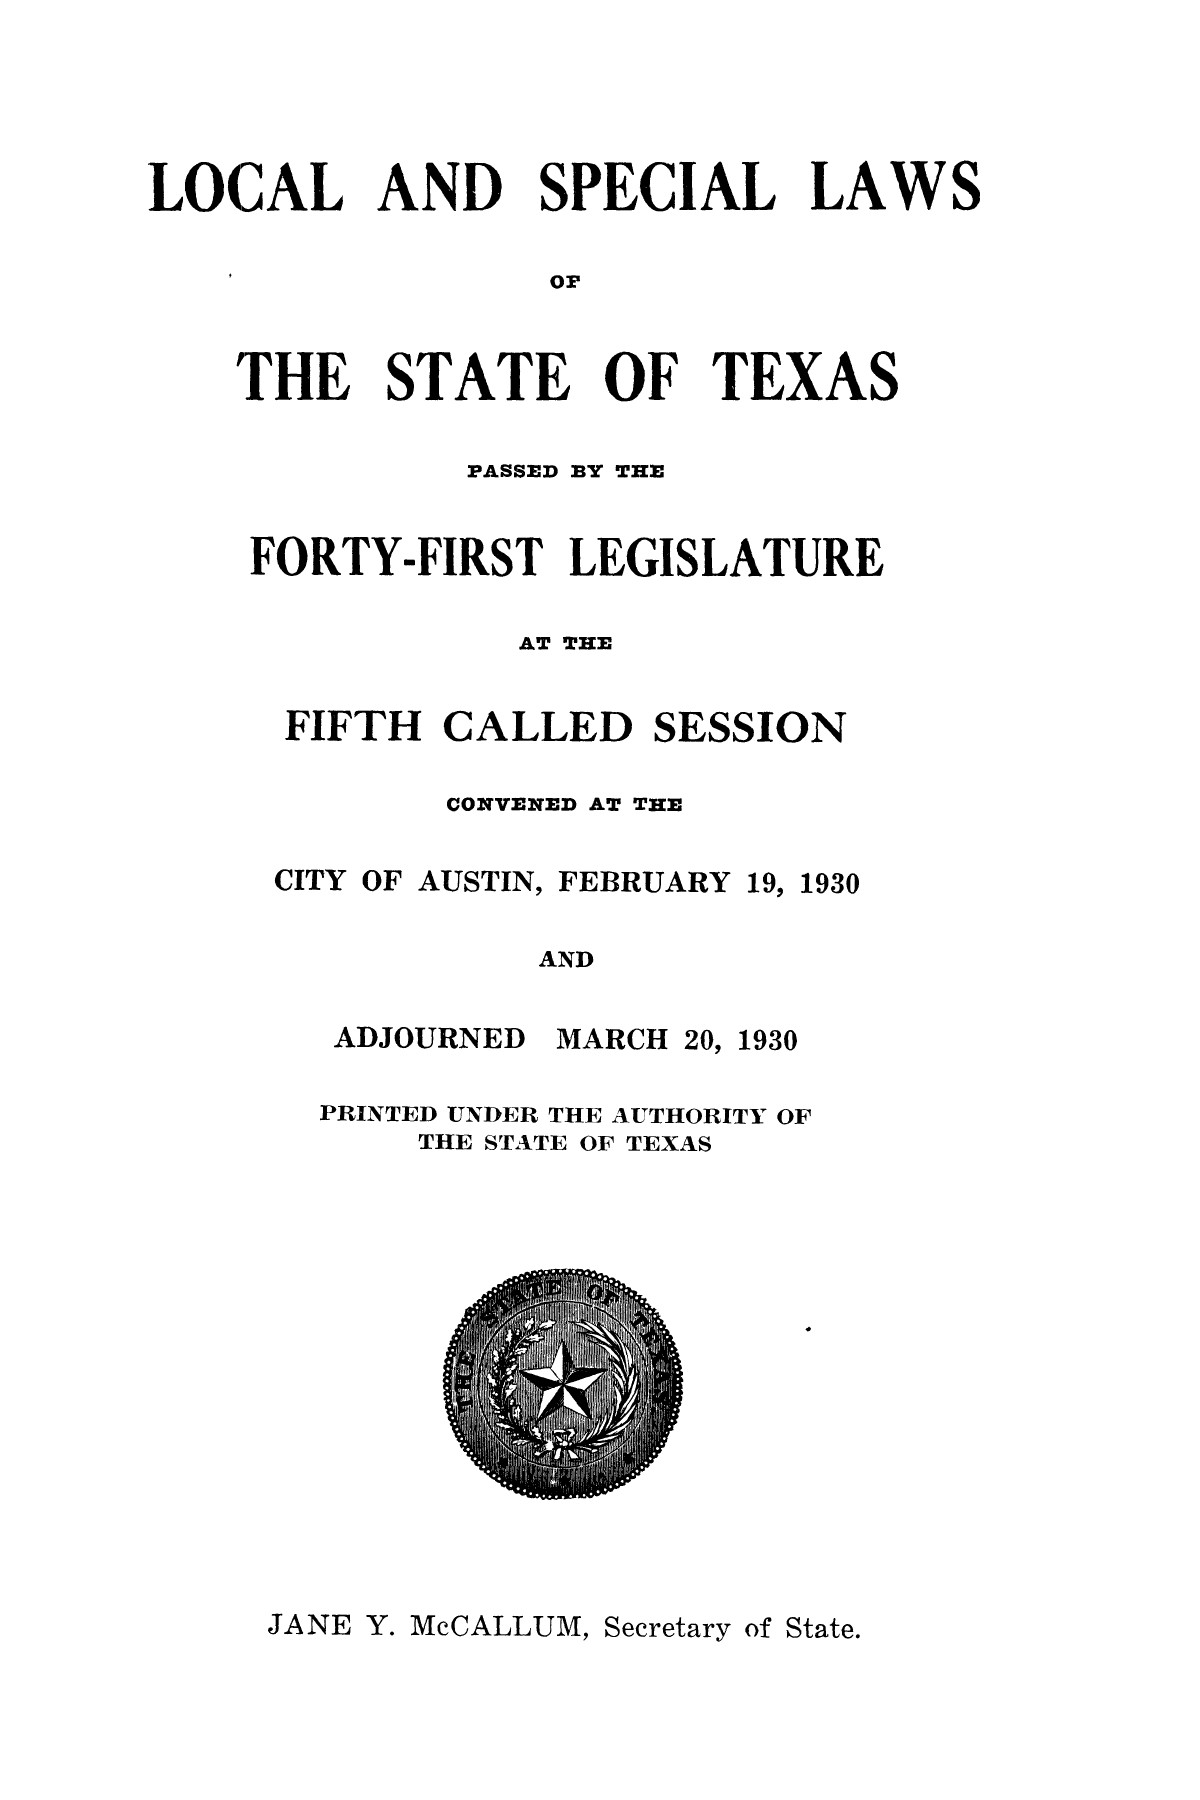 The Laws of Texas, 1929-1931 [Volume 27]
                                                
                                                    [Sequence #]: 409 of 1943
                                                